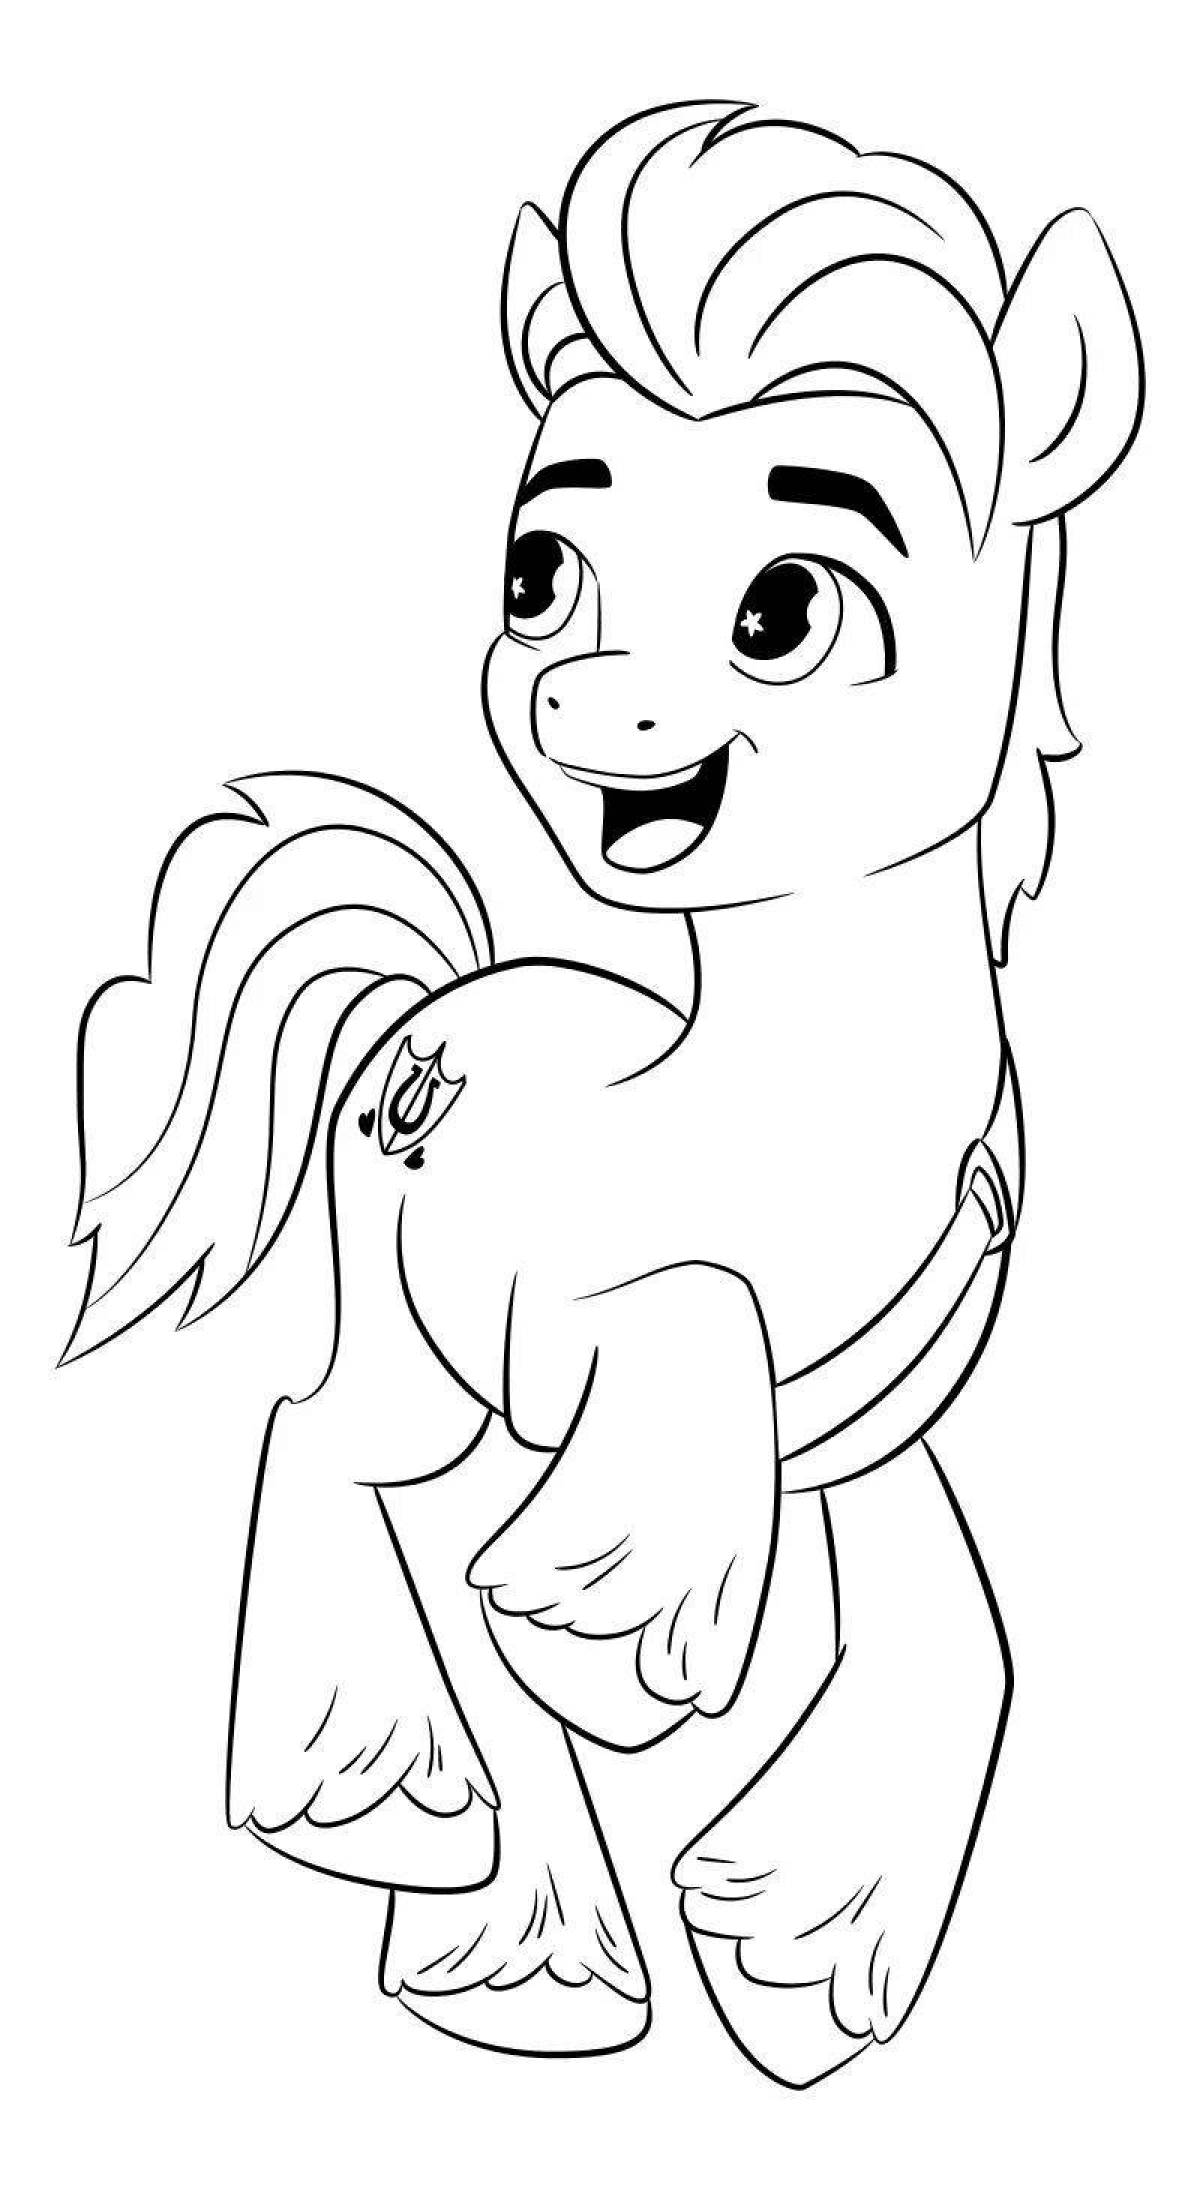 Charming pony coloring page